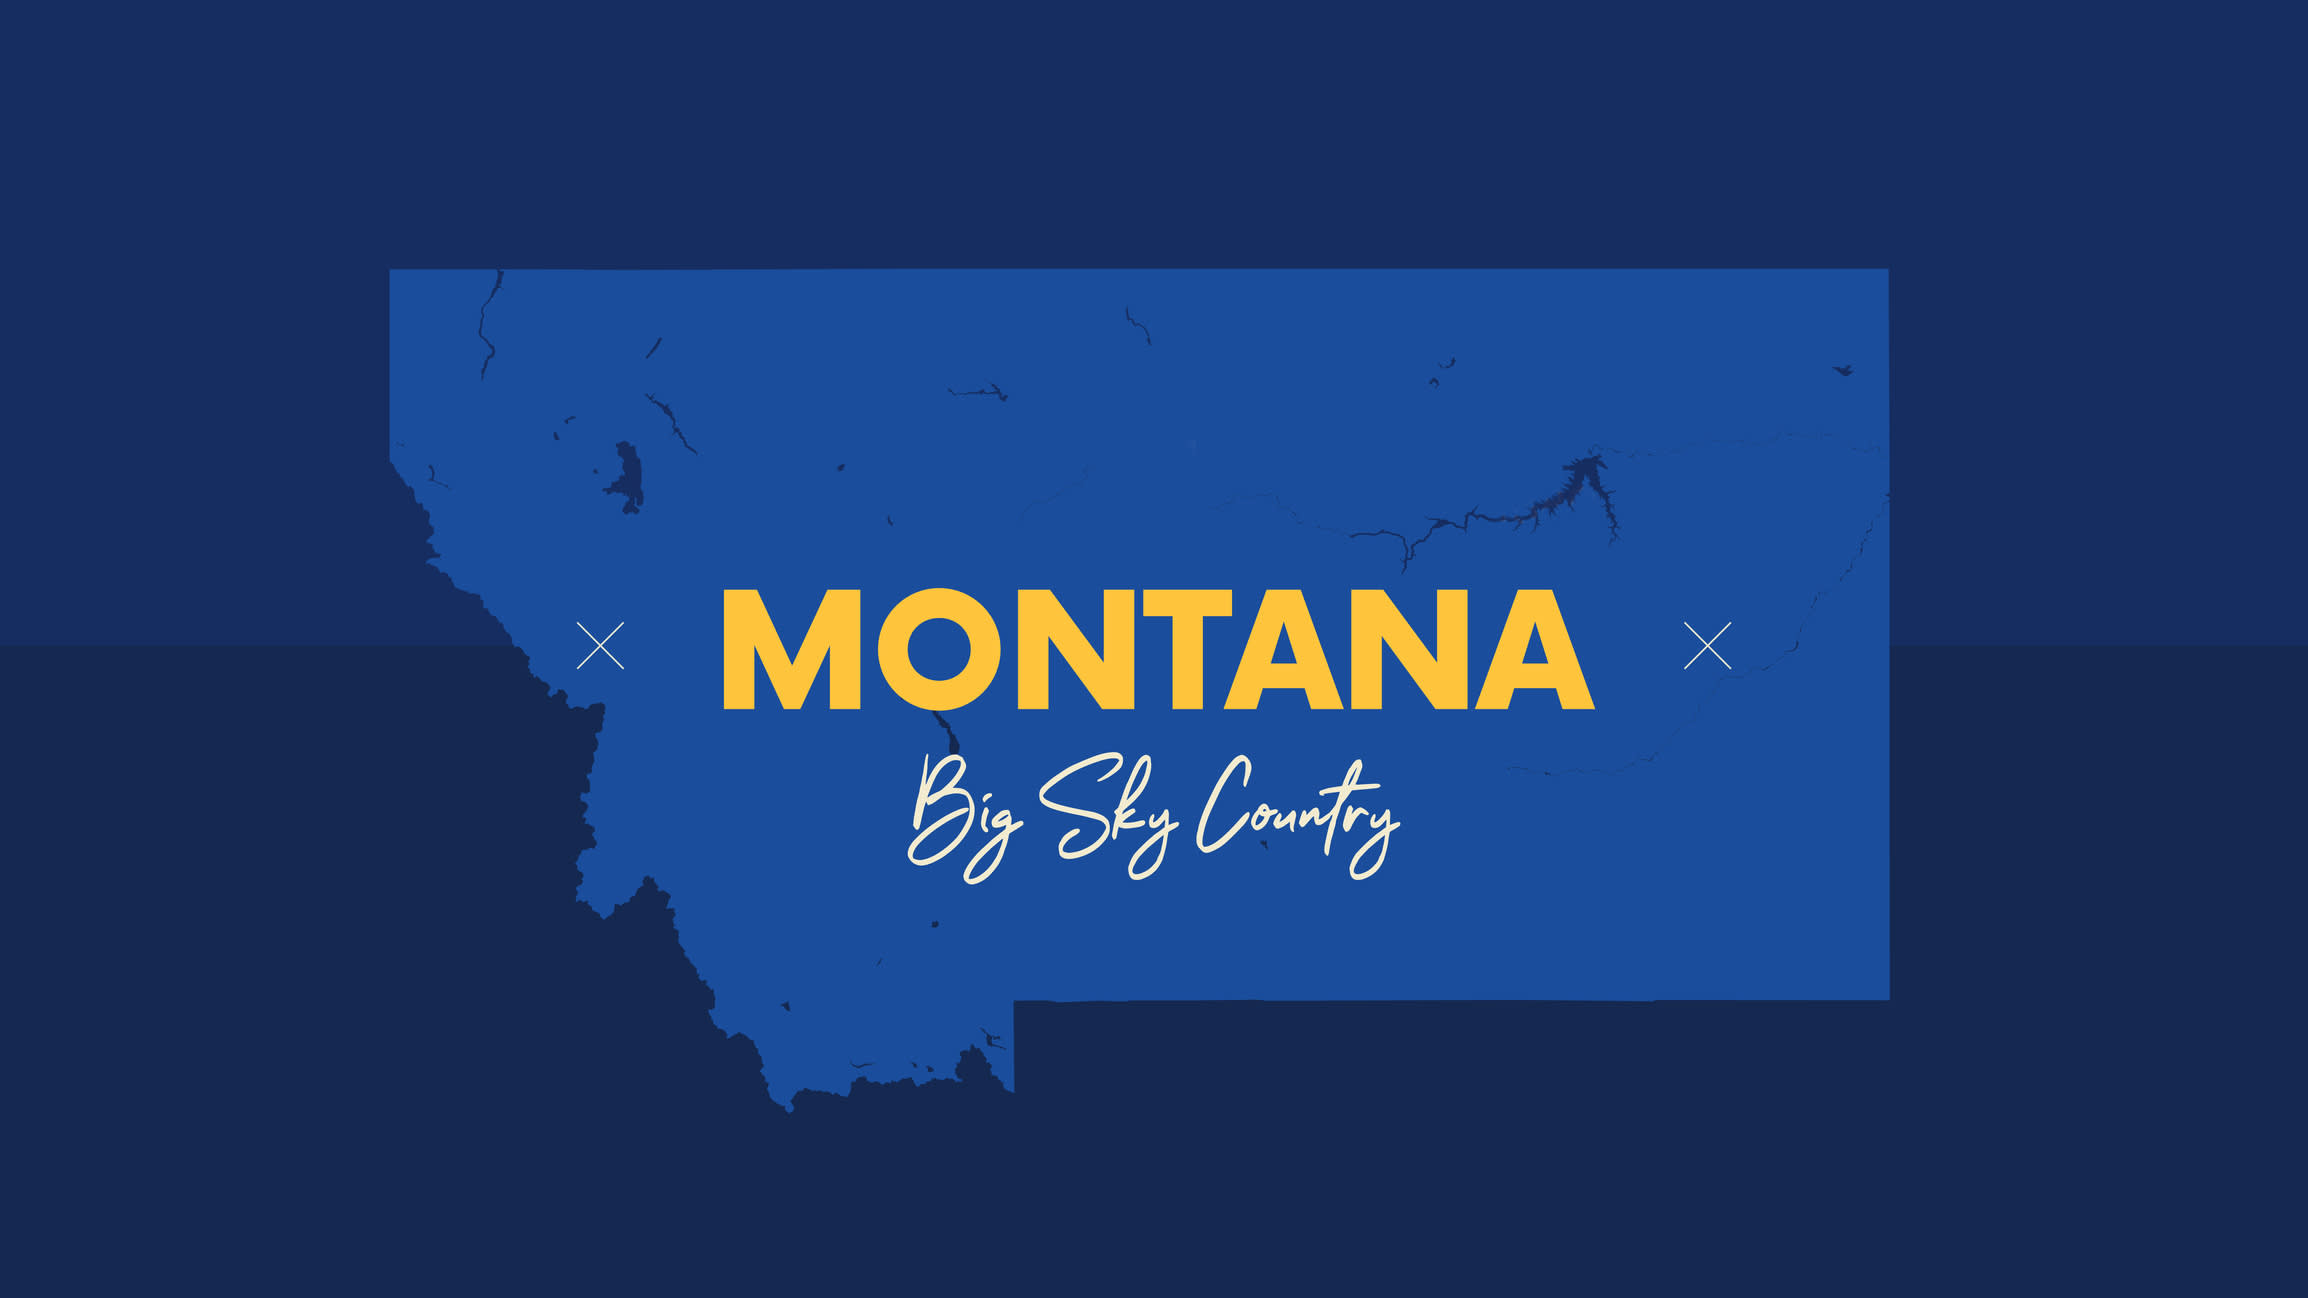 Top stories from today's Montana This Morning